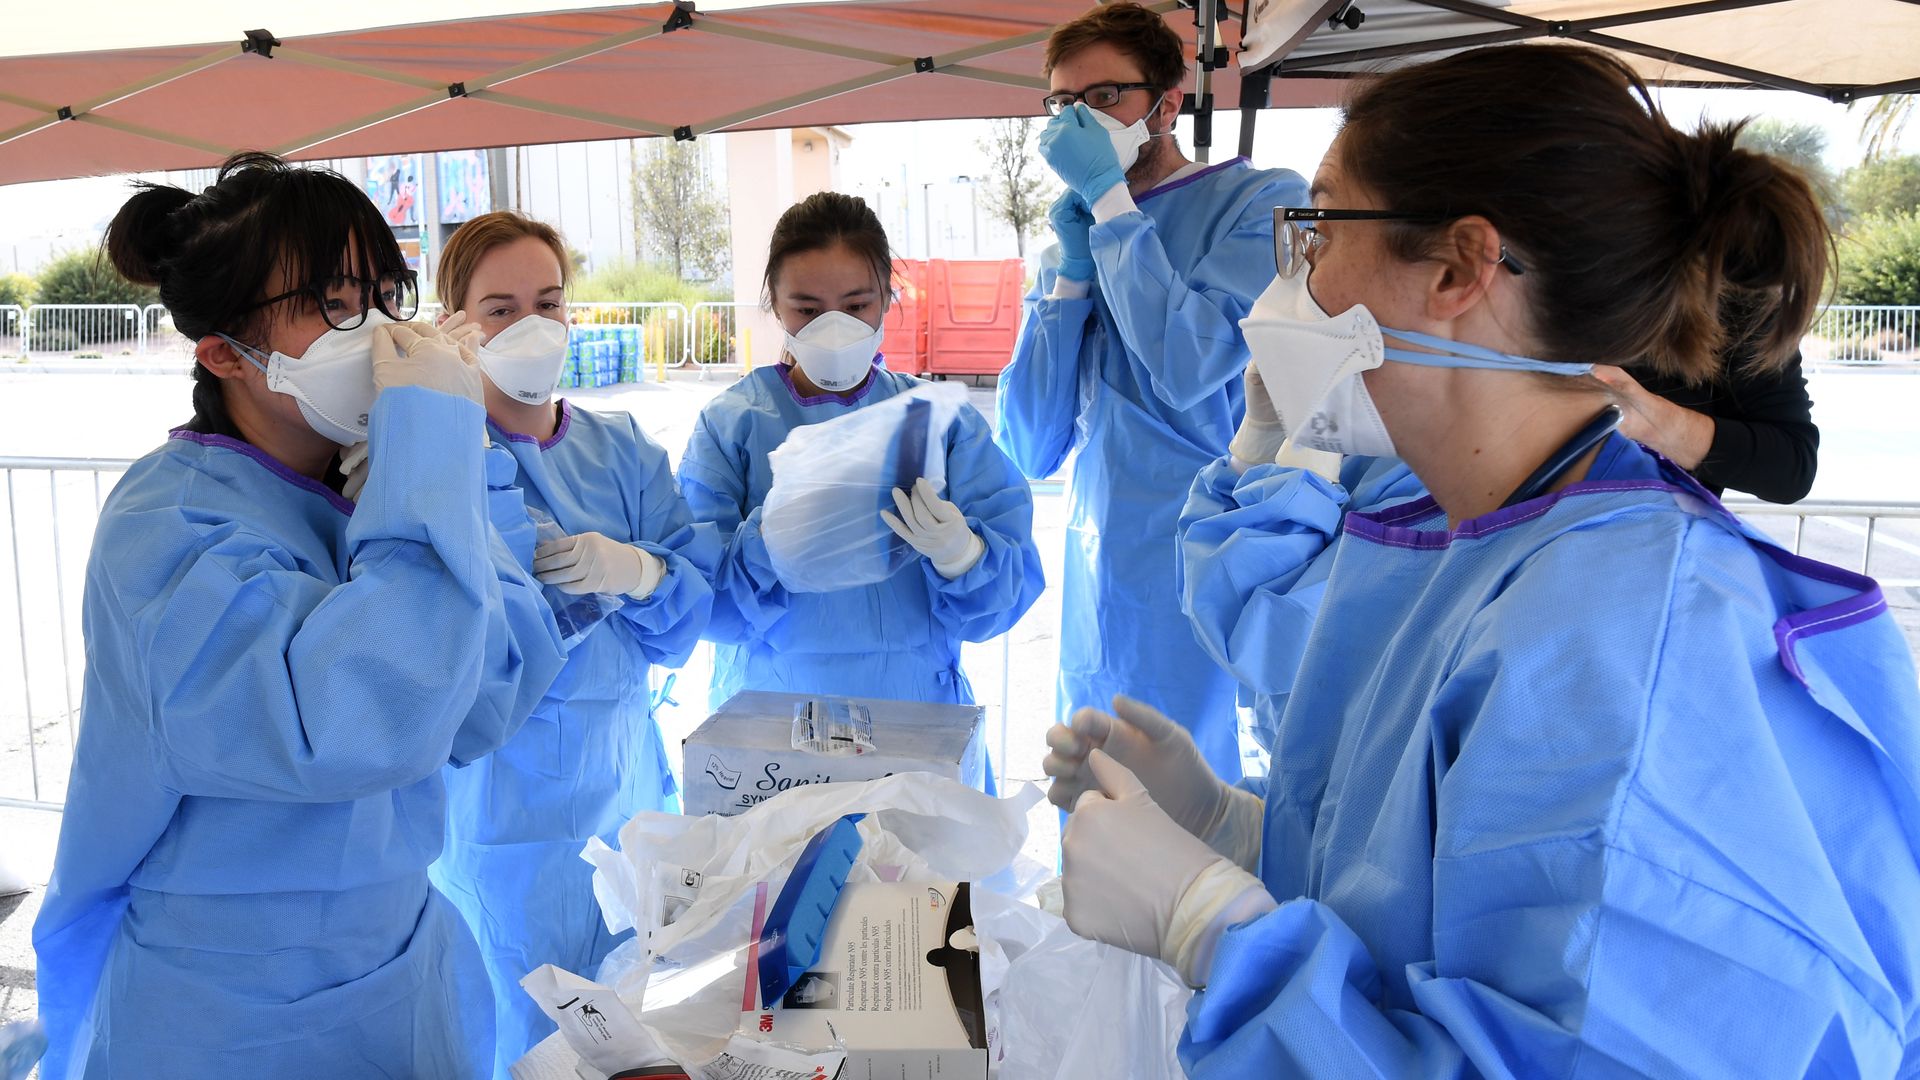 Medicals students working at a medical tent to treat the homeless in Las Vegas.